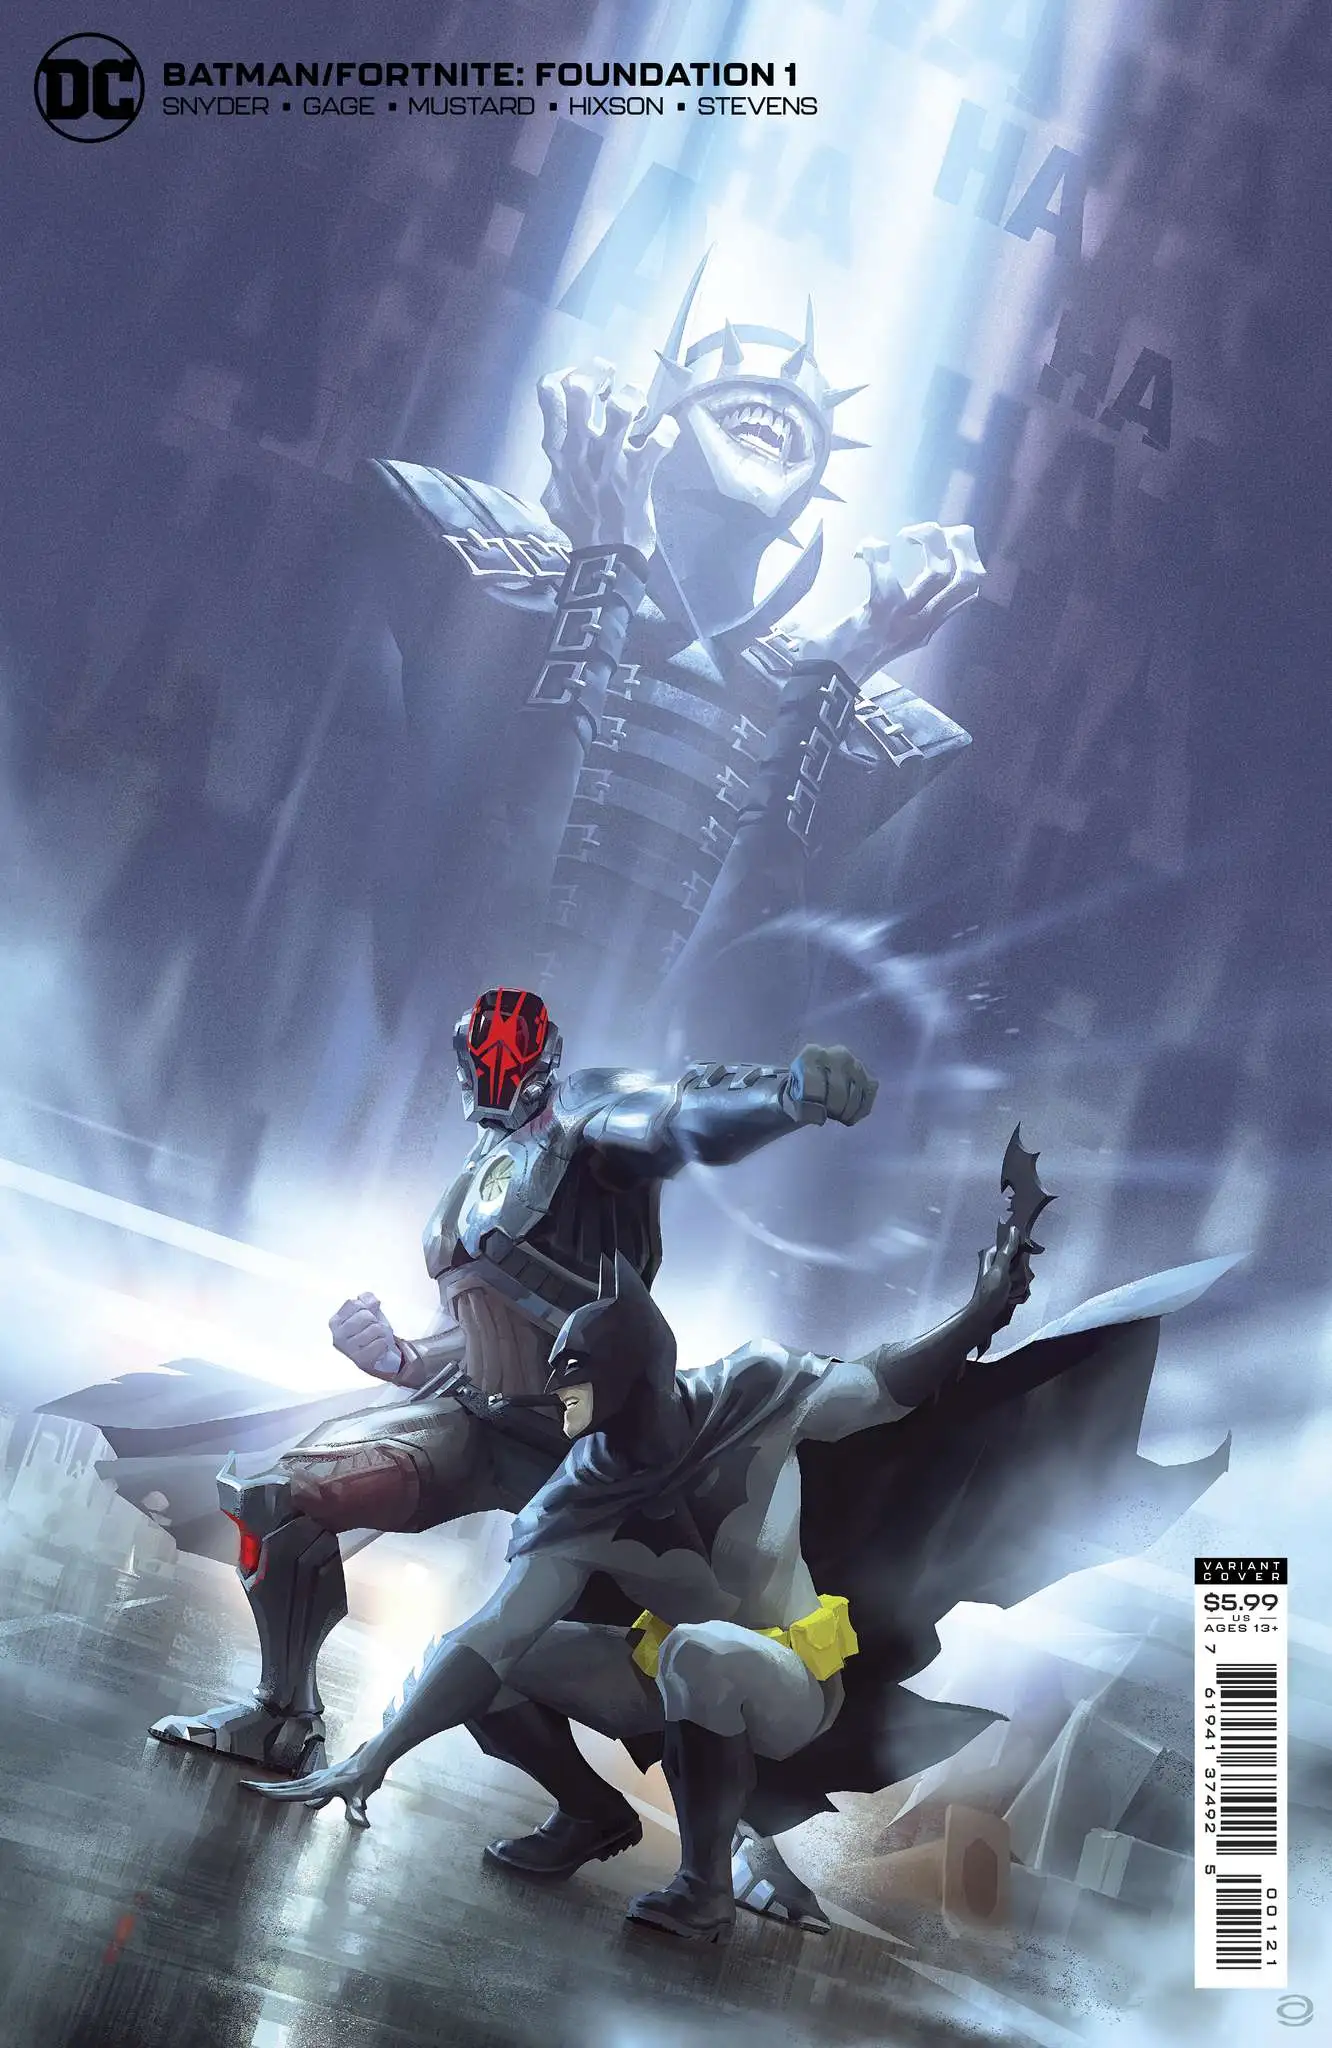 DC Comics Batman Fortnite Foundation 1 Comic Book Alex Garner Variant  Cover, Comes with Virtual Item Code to Redeem The Batman Who Laughs Outfit  - ToyWiz